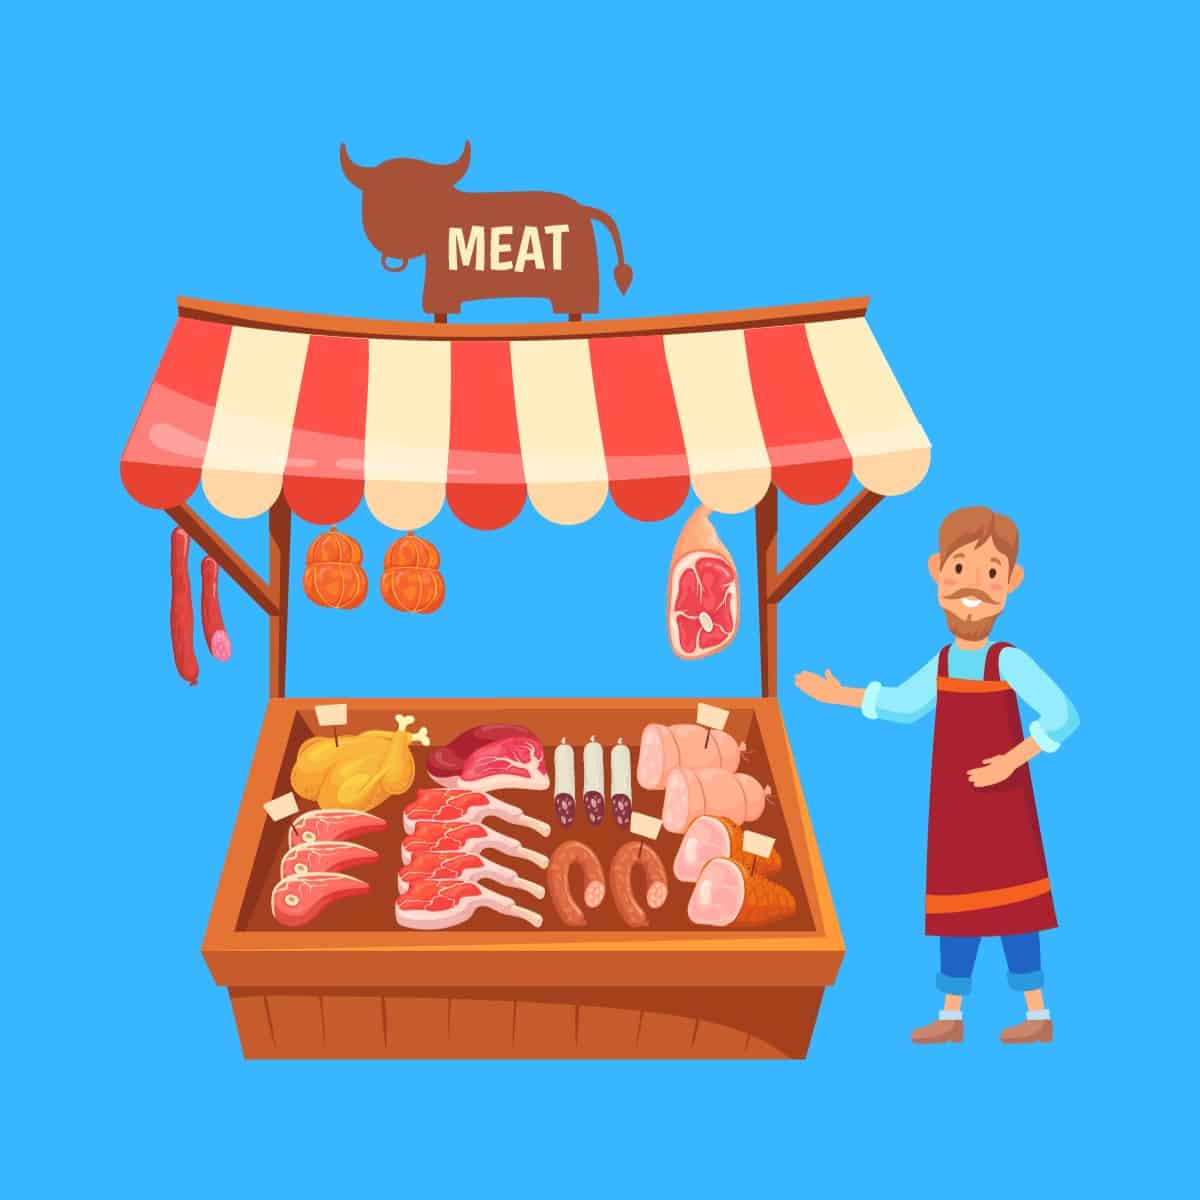 Cartoon graphic of a butcher next to his meat stall on a blue background.